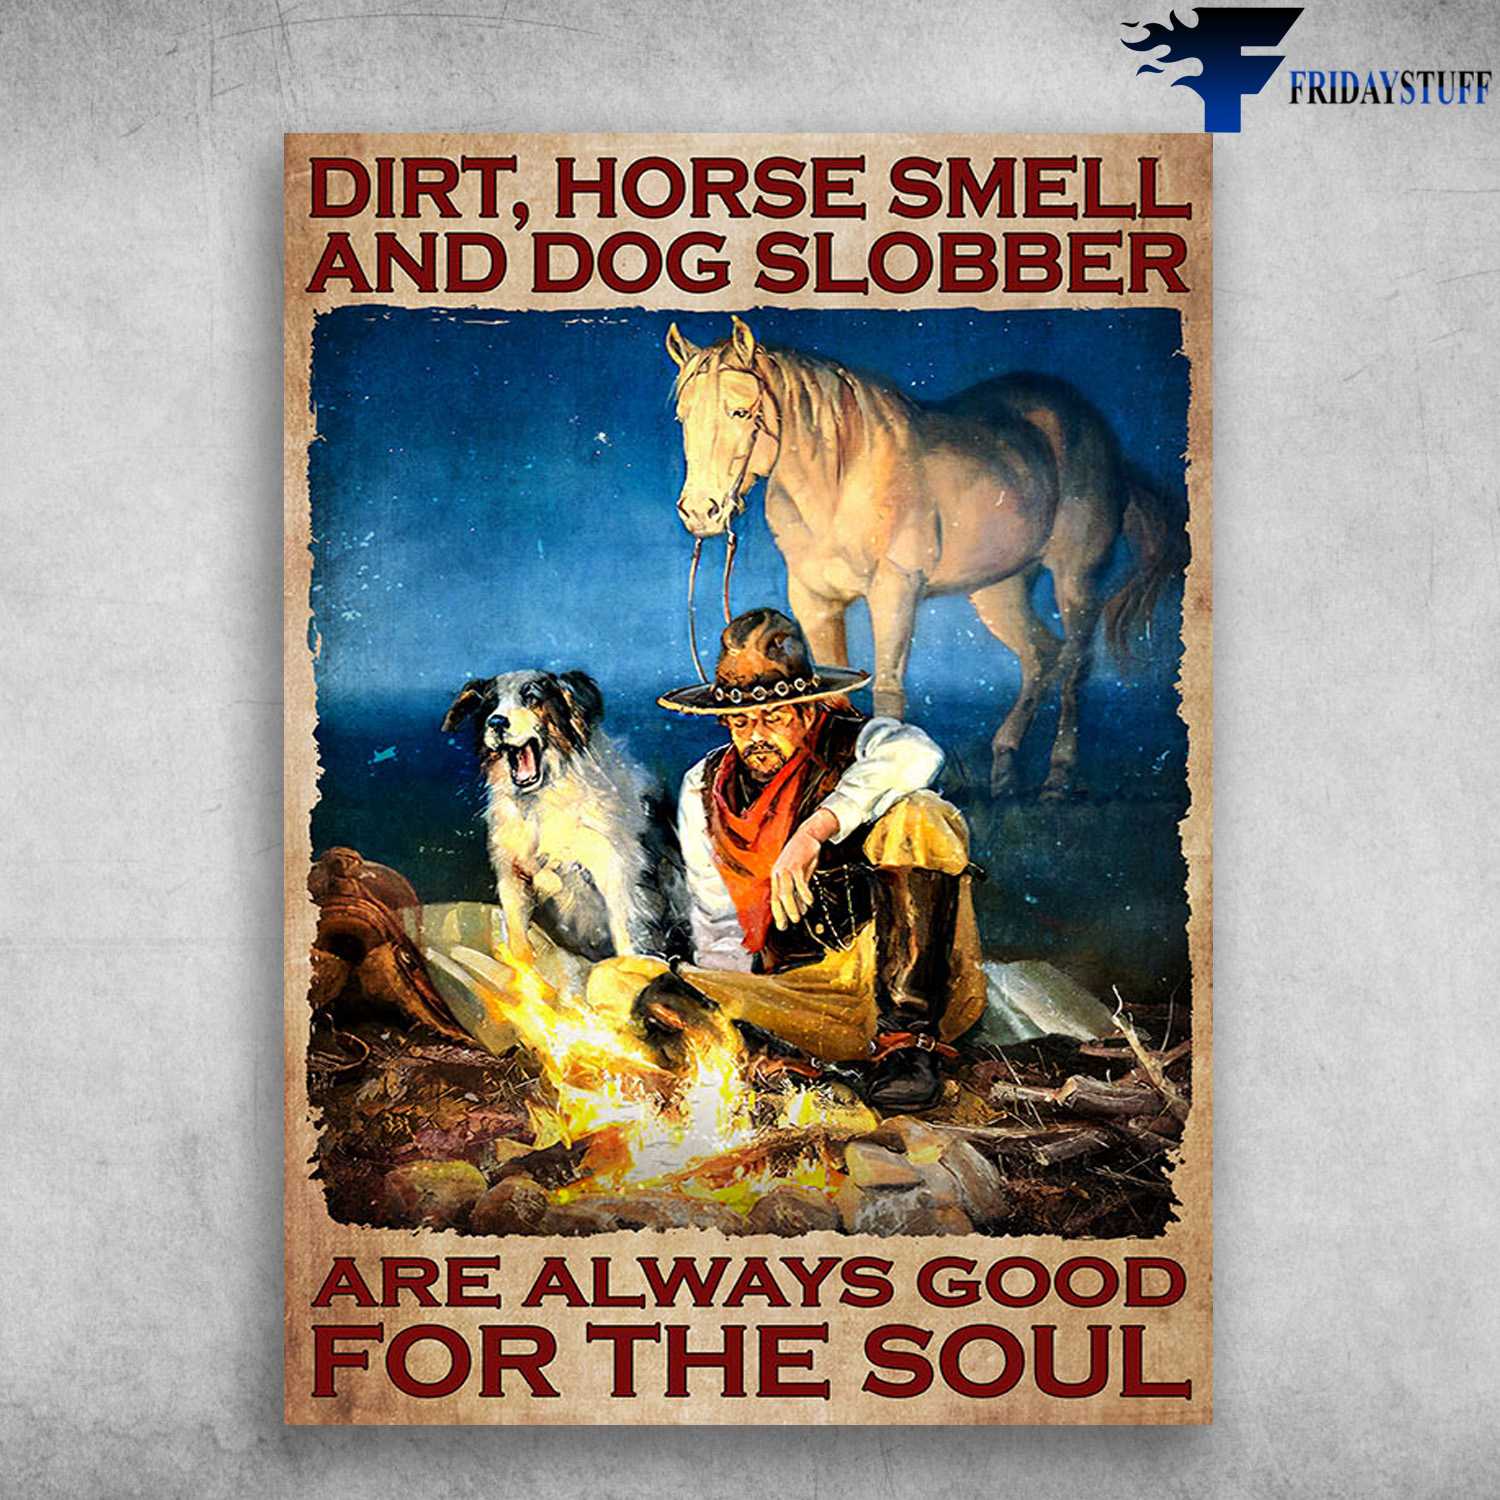 Cowboy And Horse, Camping With Dog - Dirt, Horse Smell And Dog Slobber, Are Always Good For The Soul